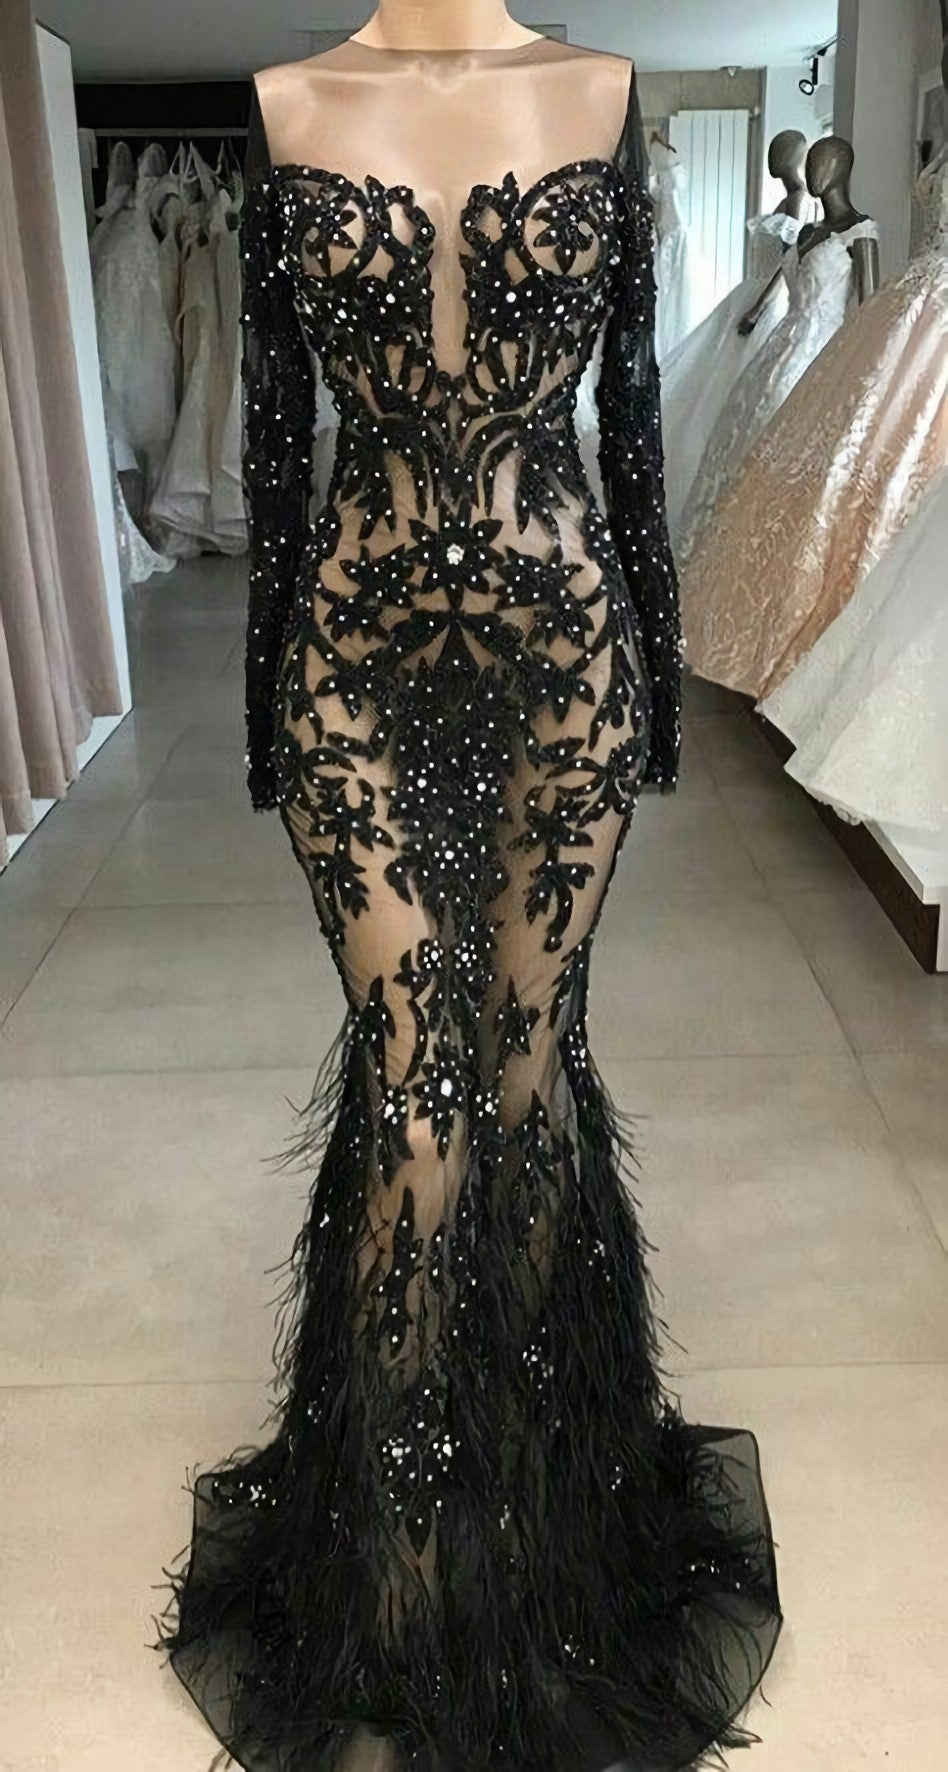 Burgundy Prom Dress, Black Prom Dresses, Feather Prom Dresses, Lace Evening Dresses, Fashion Party Dresses, Mermaid Evening Dresses, Beaded Prom Dresses, Pearls Prom Dresses, Mermaid Evening Gowns